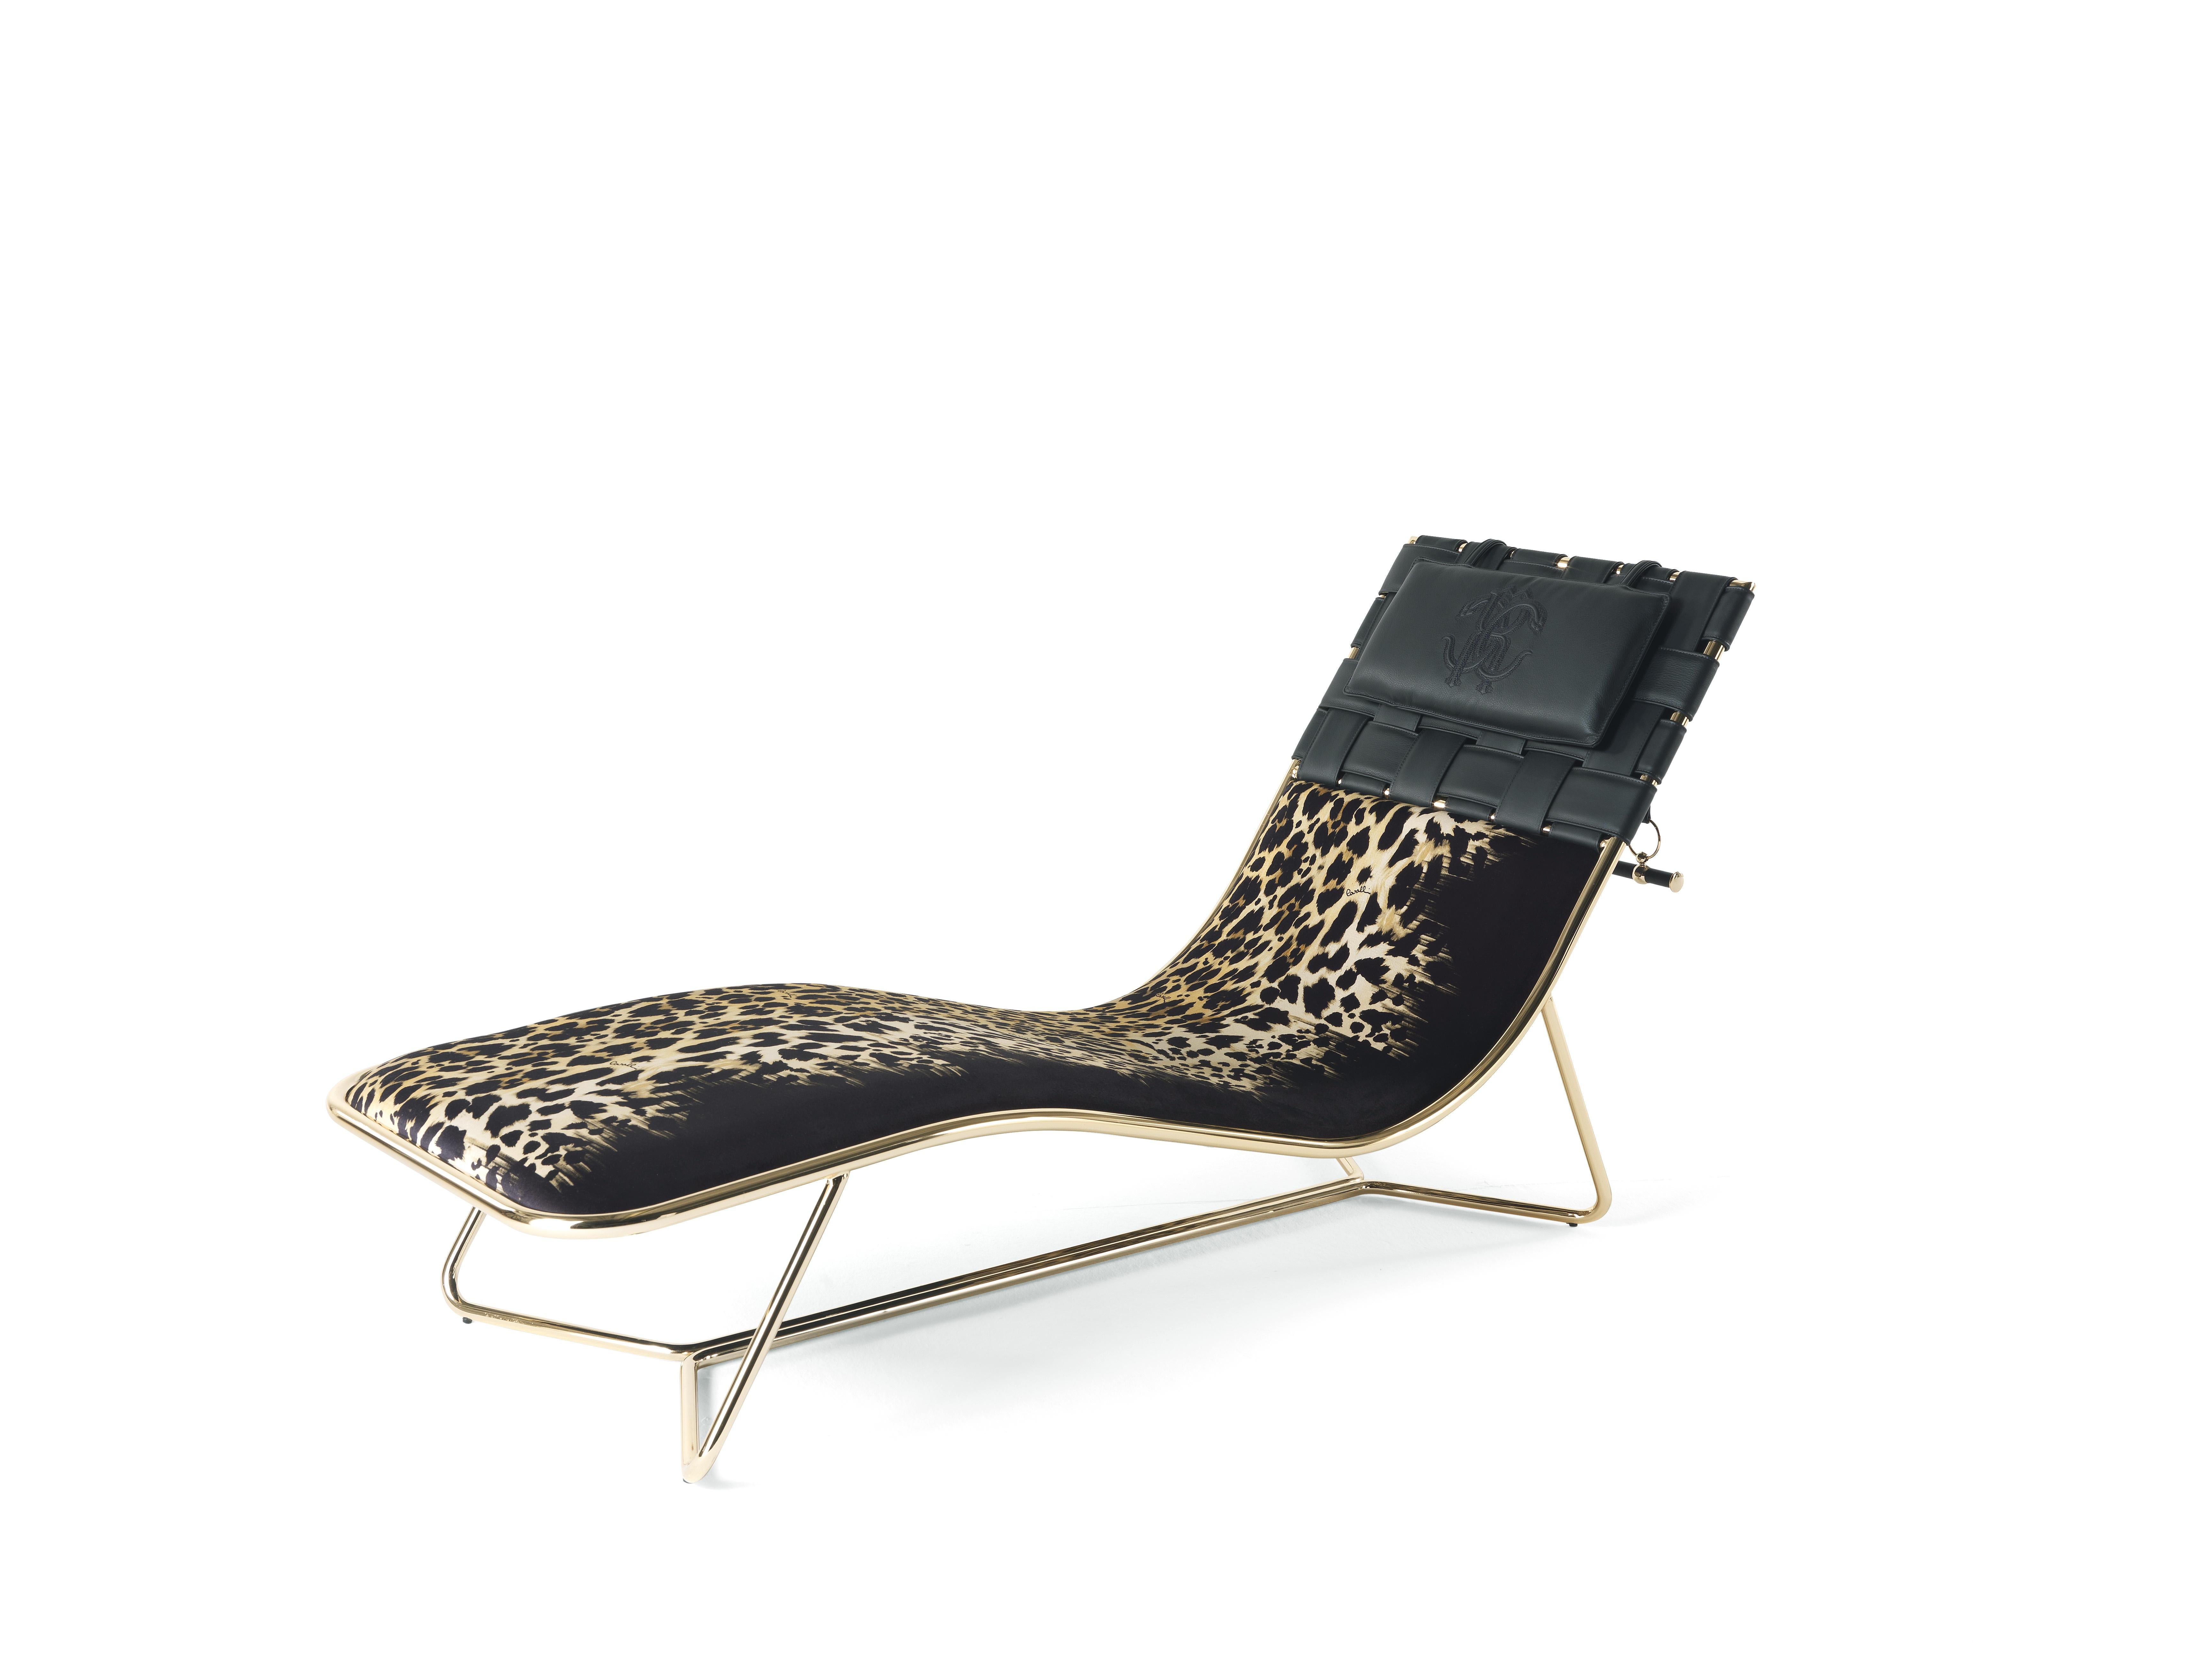 An irresistible invitation to chill out in pure Roberto Cavalli style, the Papeete chaise longue conquers with its essential lines and its sinuous and inviting shapes. In perfect balance between comfort, style and functionality, this piece of